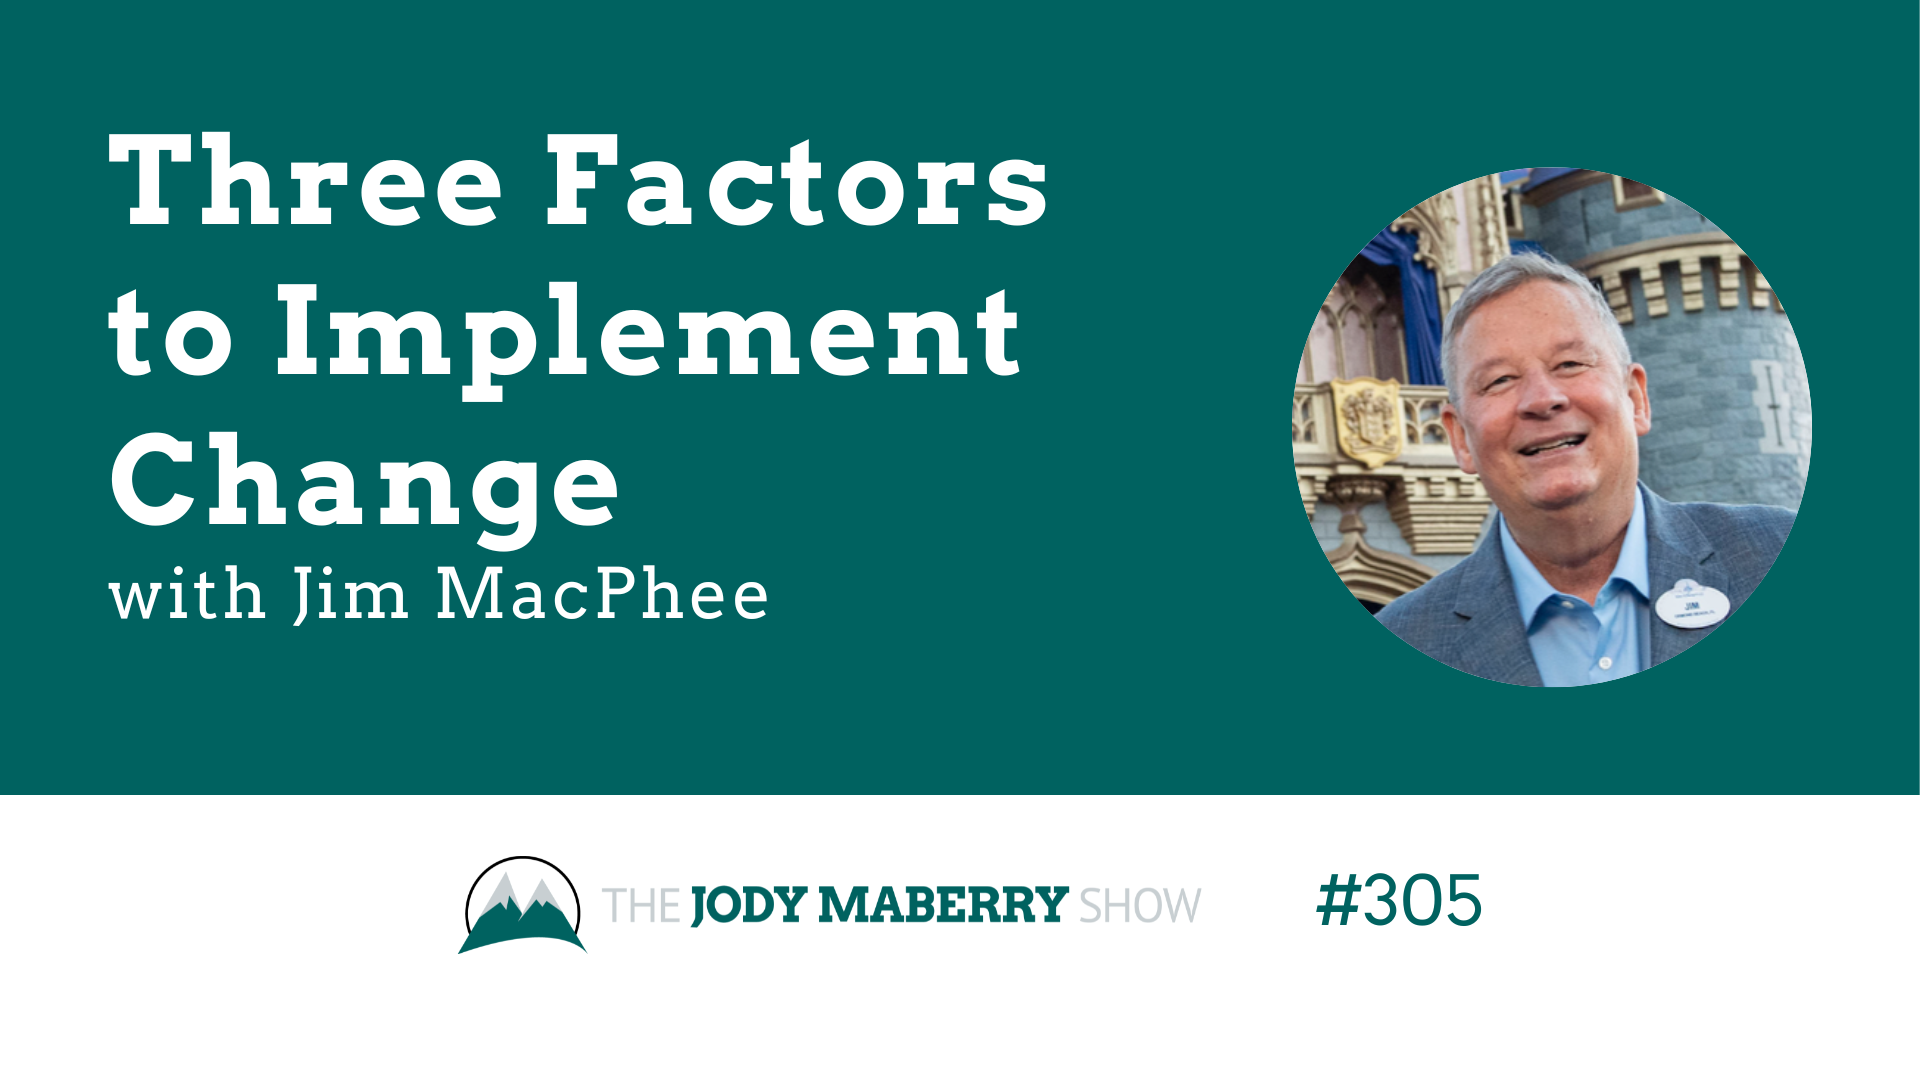 Jody Maberry Show Episode 307 Three Factors to Implement Change